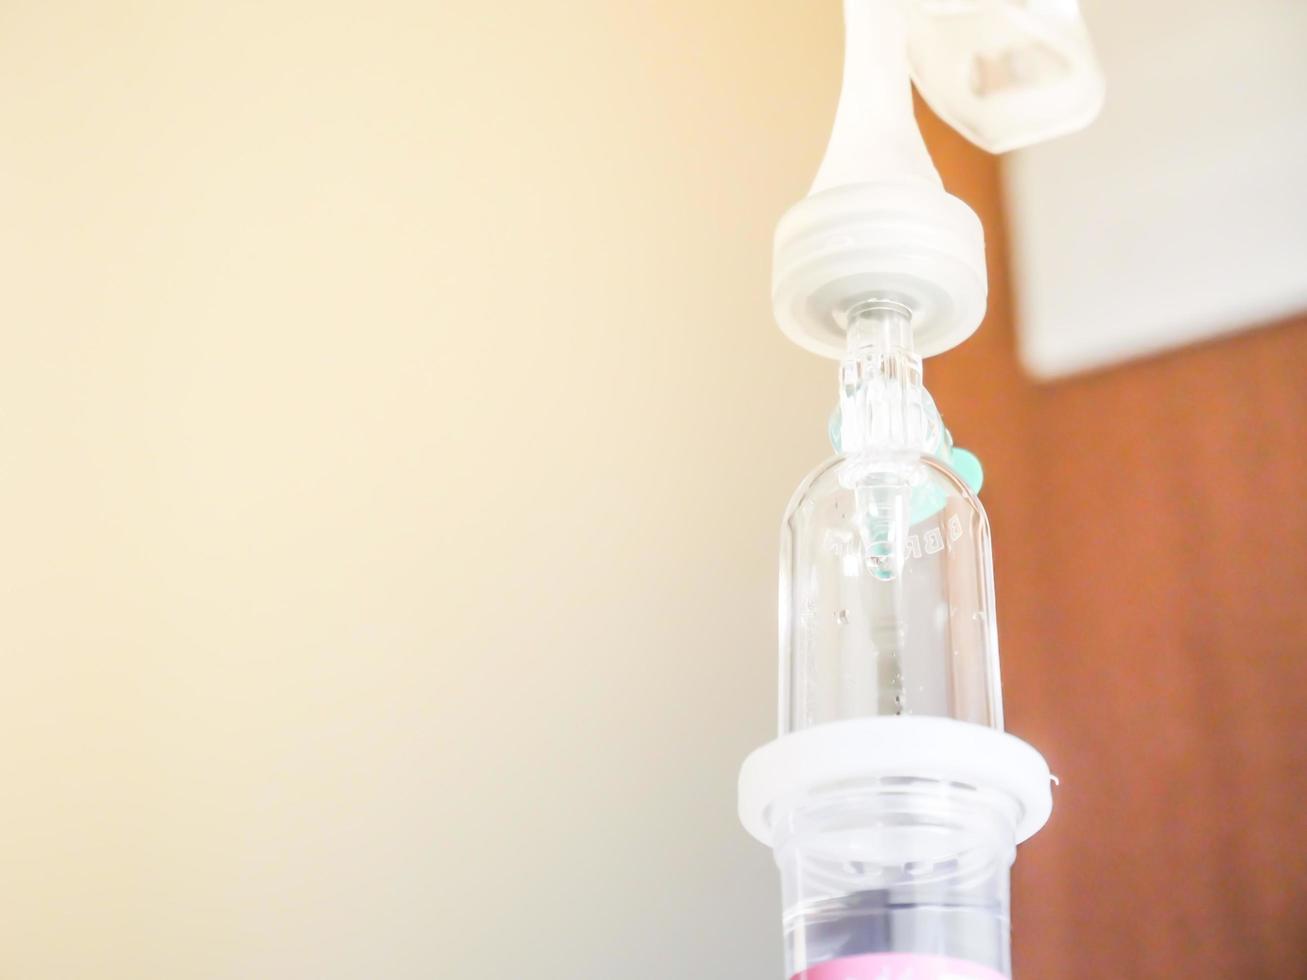 IV Drip with patient, Medical Concept, treatment emergency and injection drug infusion care chemotherapy photo